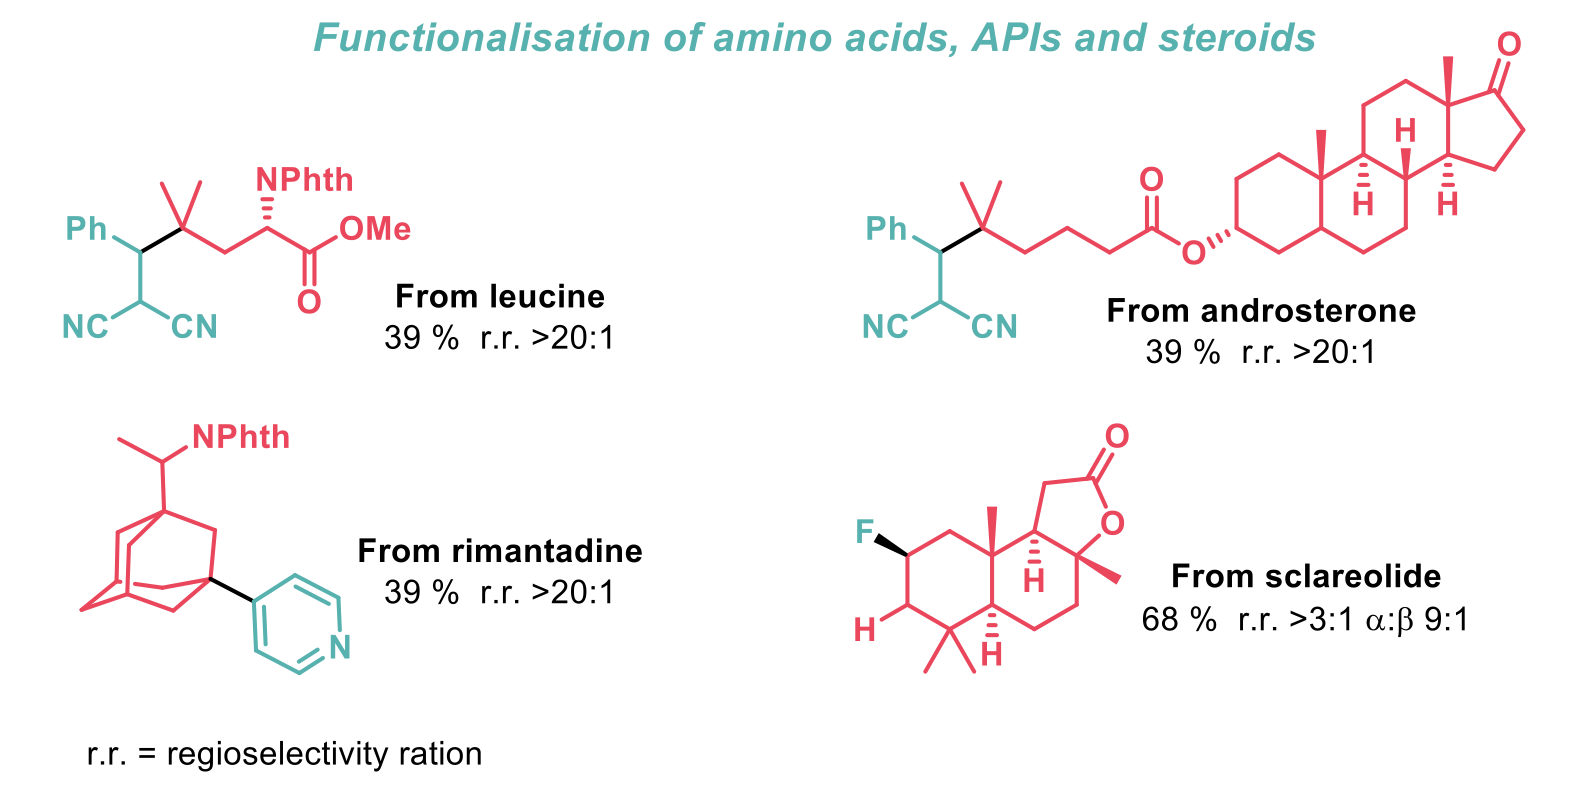 Functionalisation of amino acids, APIs and steroids